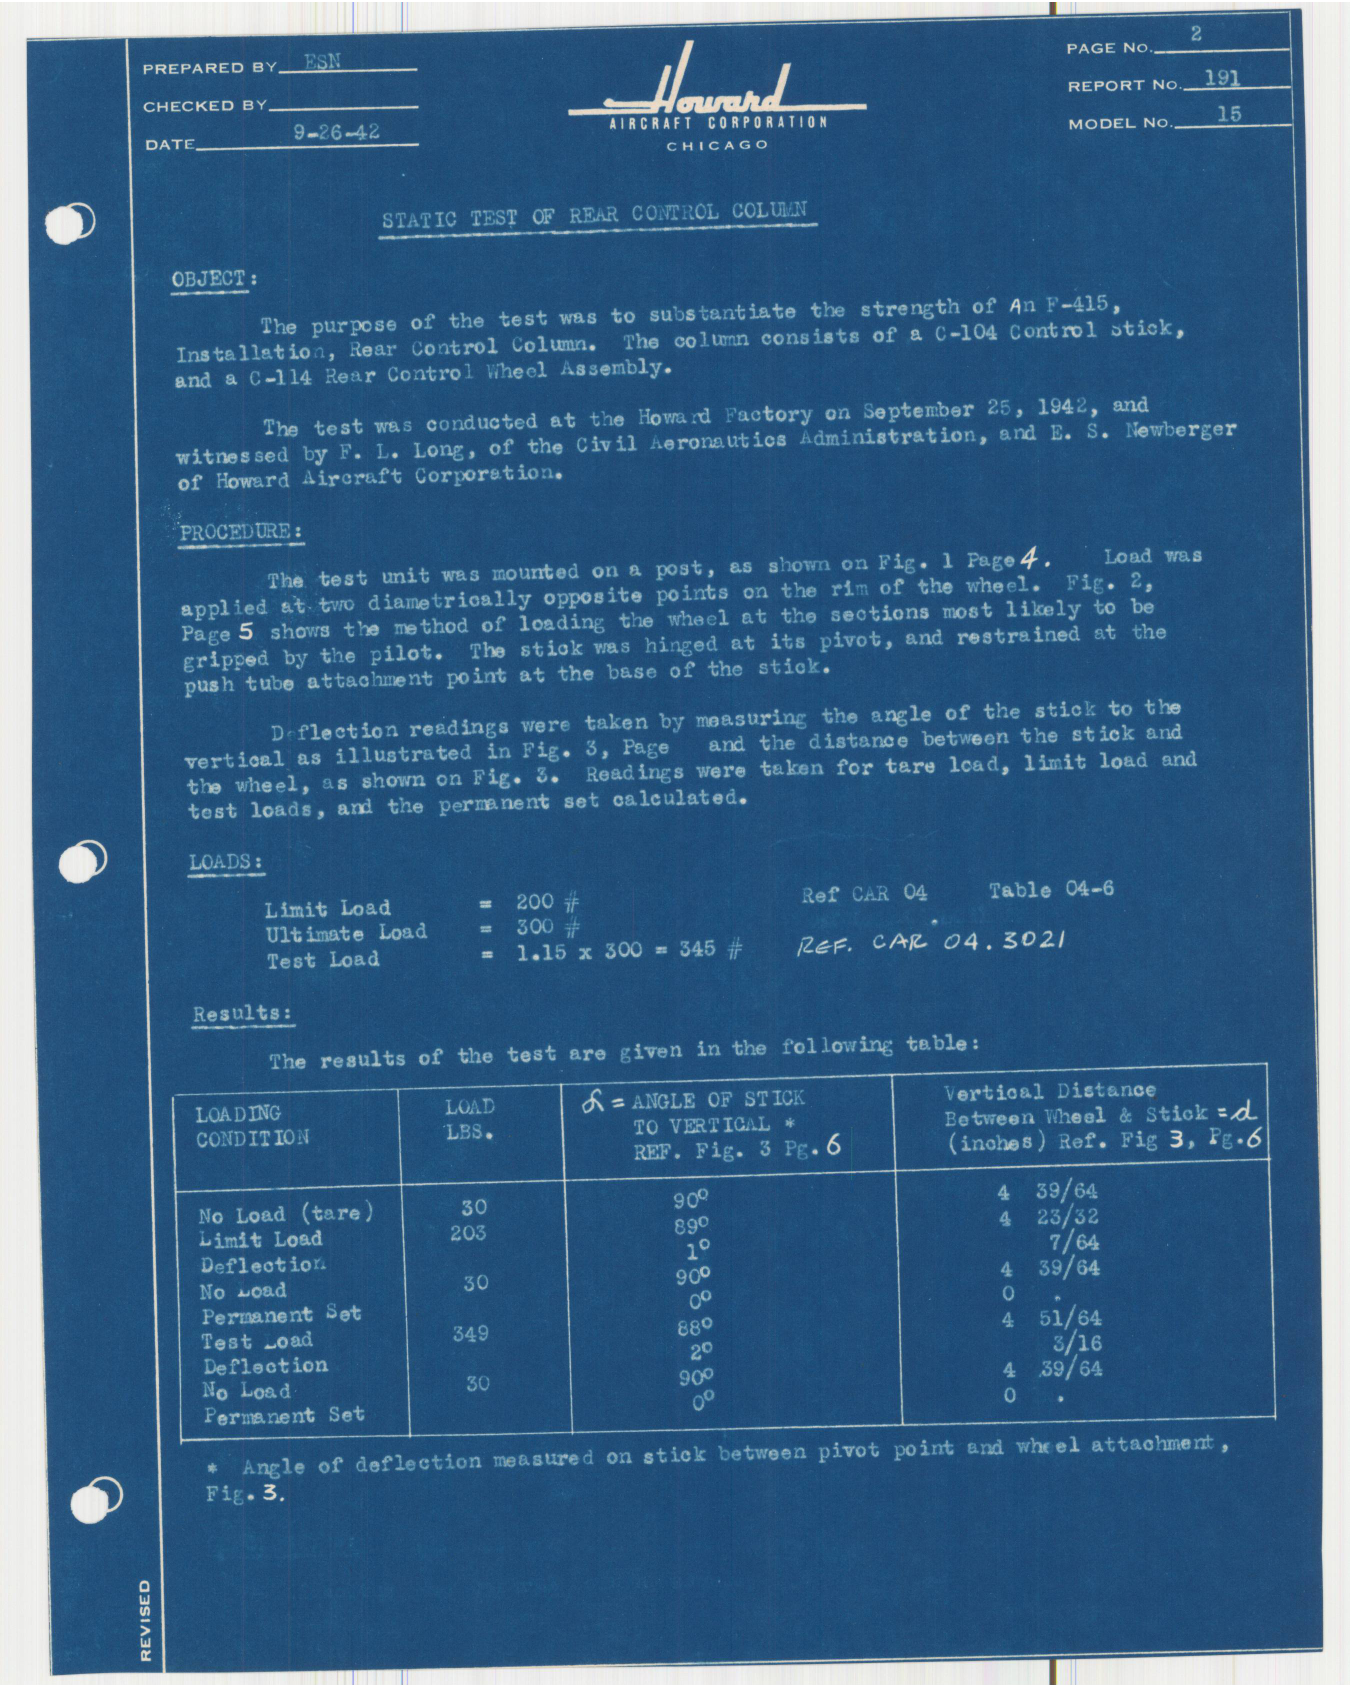 Sample page 3 from AirCorps Library document: Report 191, Static Test of Rear Control Column Assembly, DGA-15